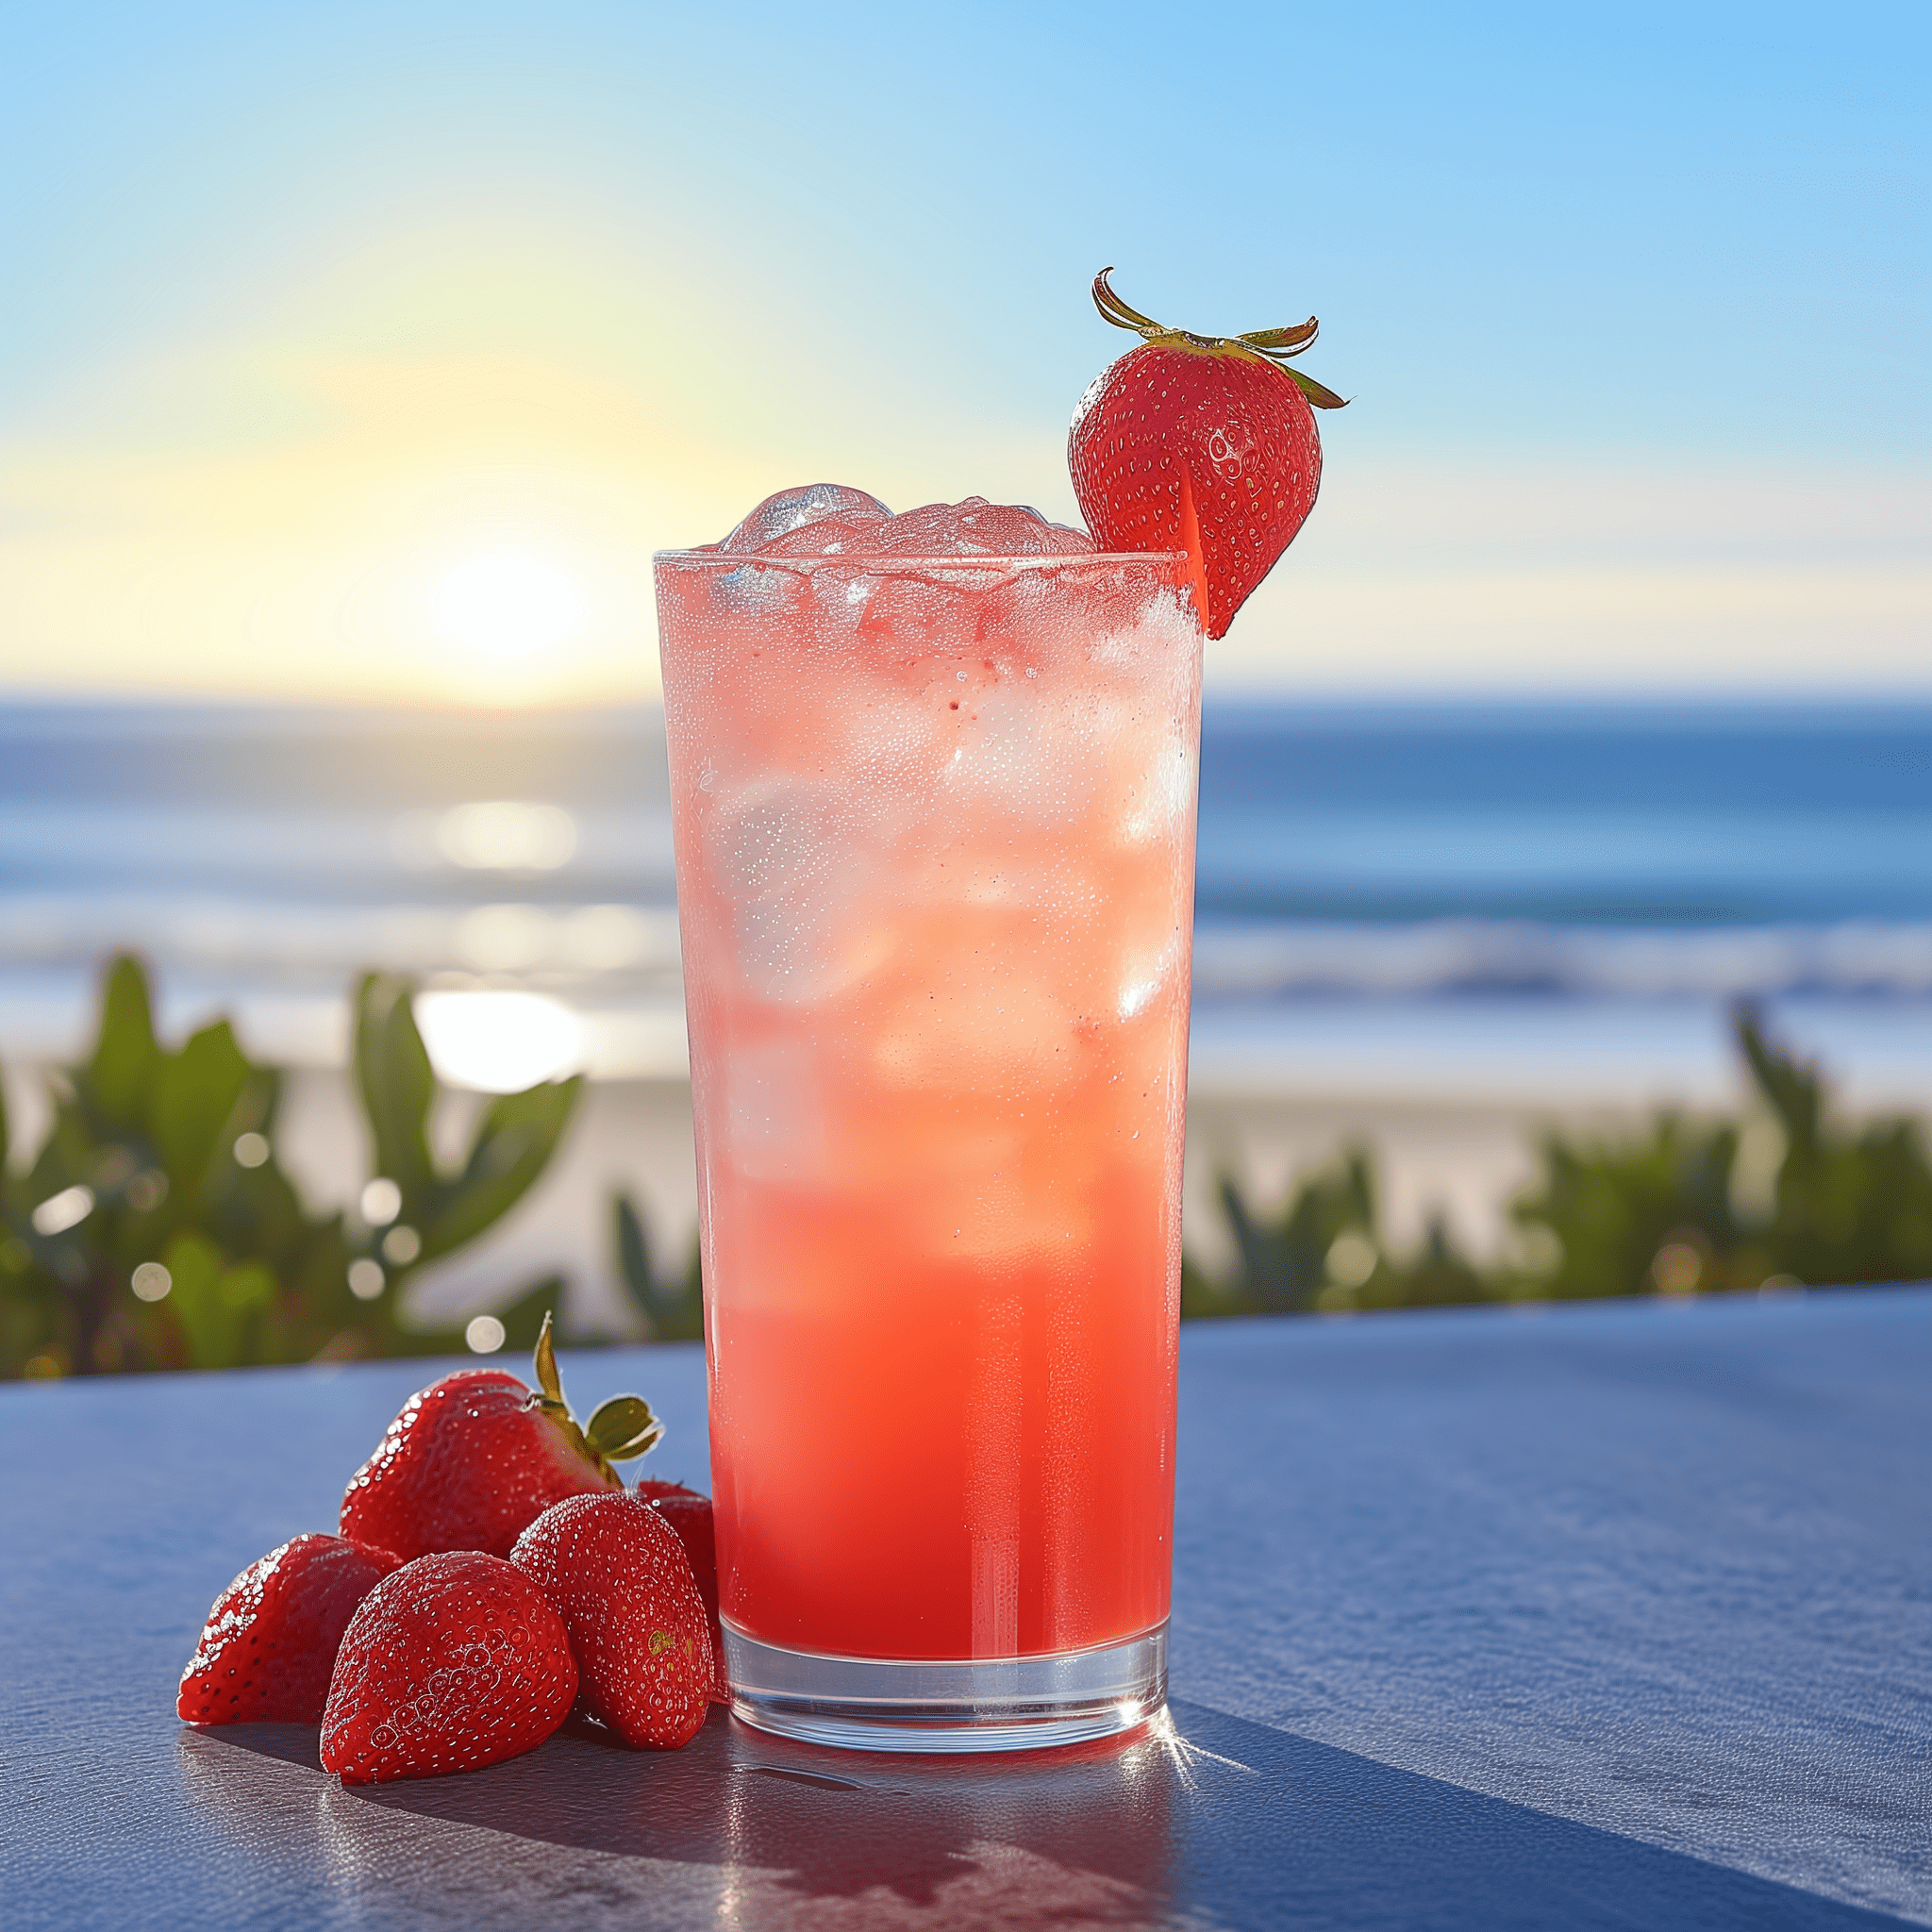 Malibu Strawberry Bay Breeze Cocktail Recipe - The Malibu Strawberry Bay Breeze offers a delightful blend of sweet and tart flavors. The Malibu Strawberry rum provides a luscious strawberry taste that's complemented by the tangy cranberry juice and the tropical sweetness of pineapple juice. It's a light and refreshing cocktail with a fruity kick that's neither too strong nor too sugary.